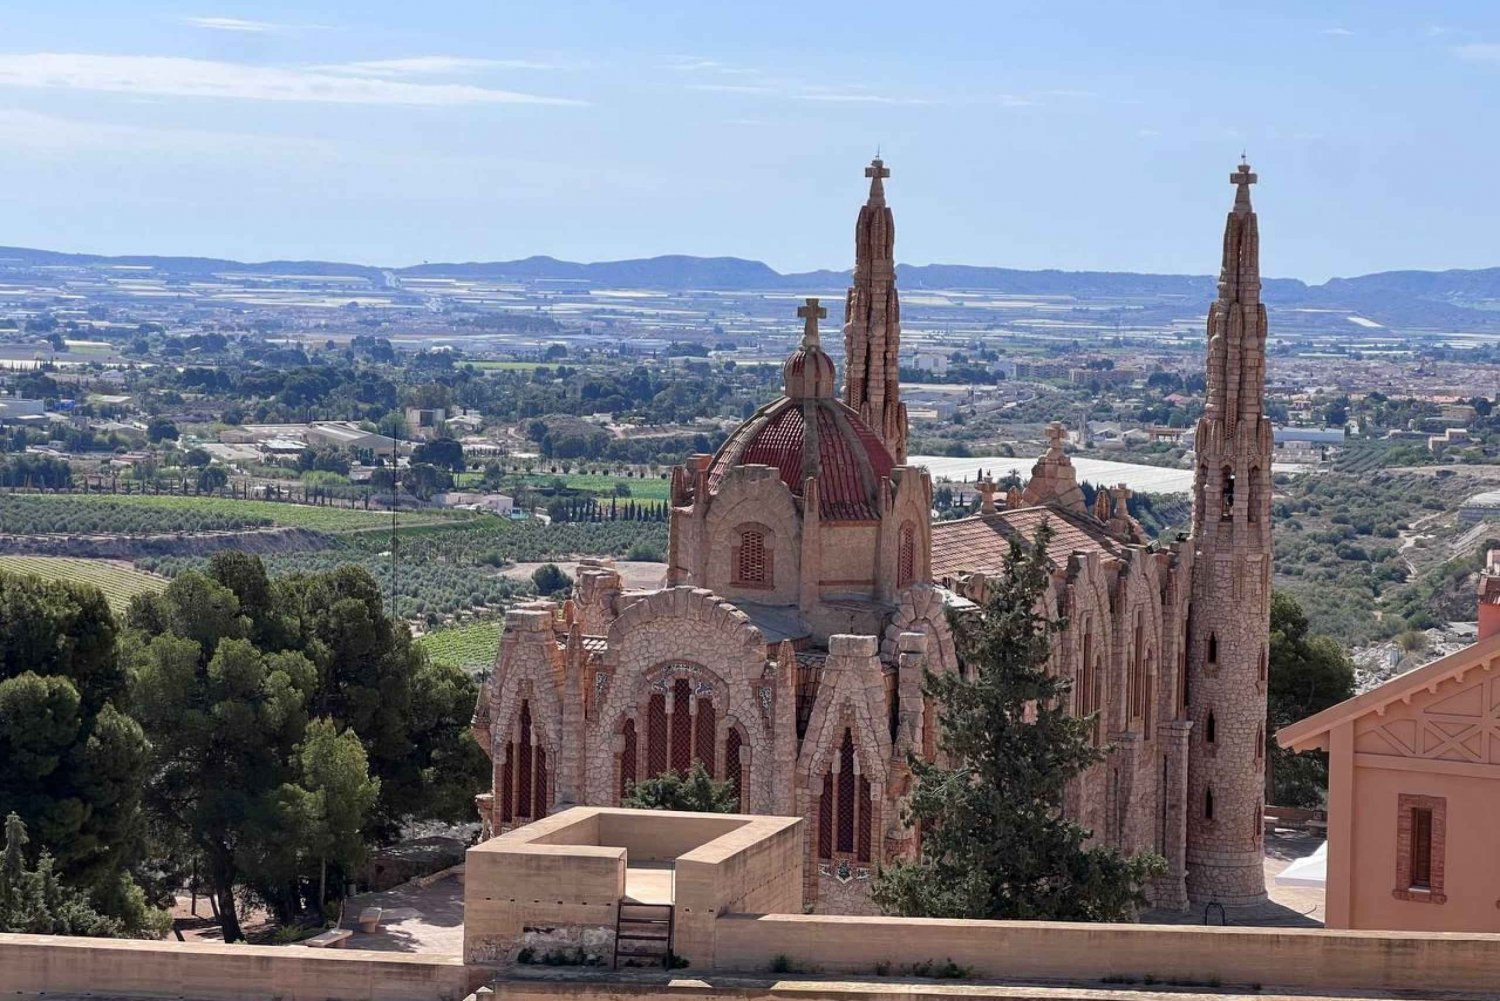 Alicante:Guided tour to Castle of Mola+tasting of local wine